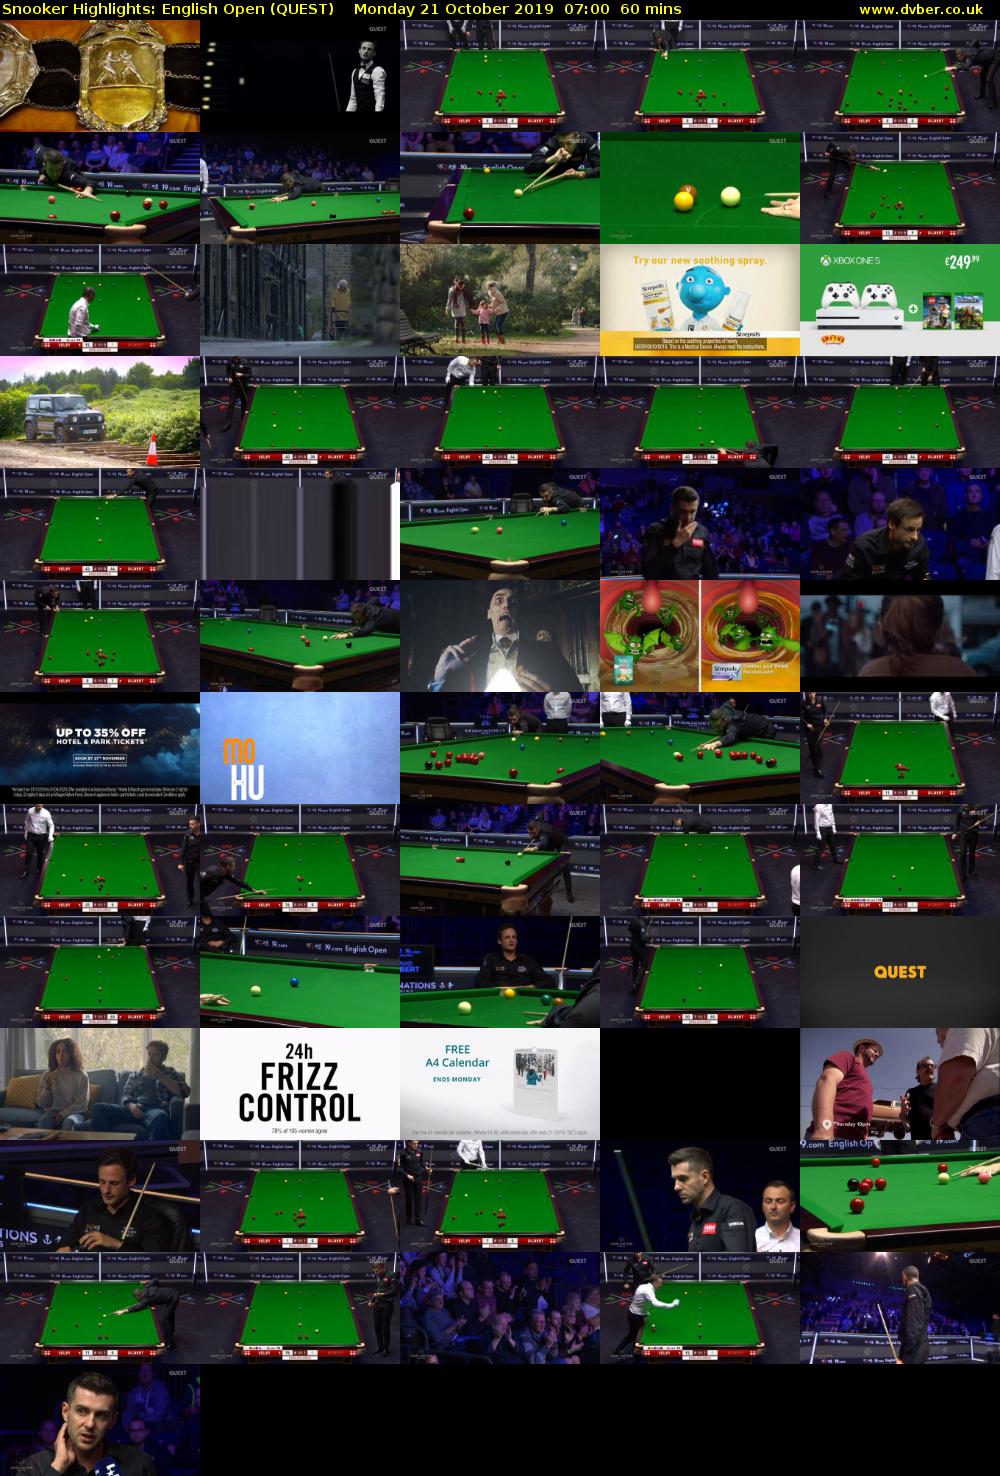 Snooker Highlights: English Open (QUEST) Monday 21 October 2019 07:00 - 08:00